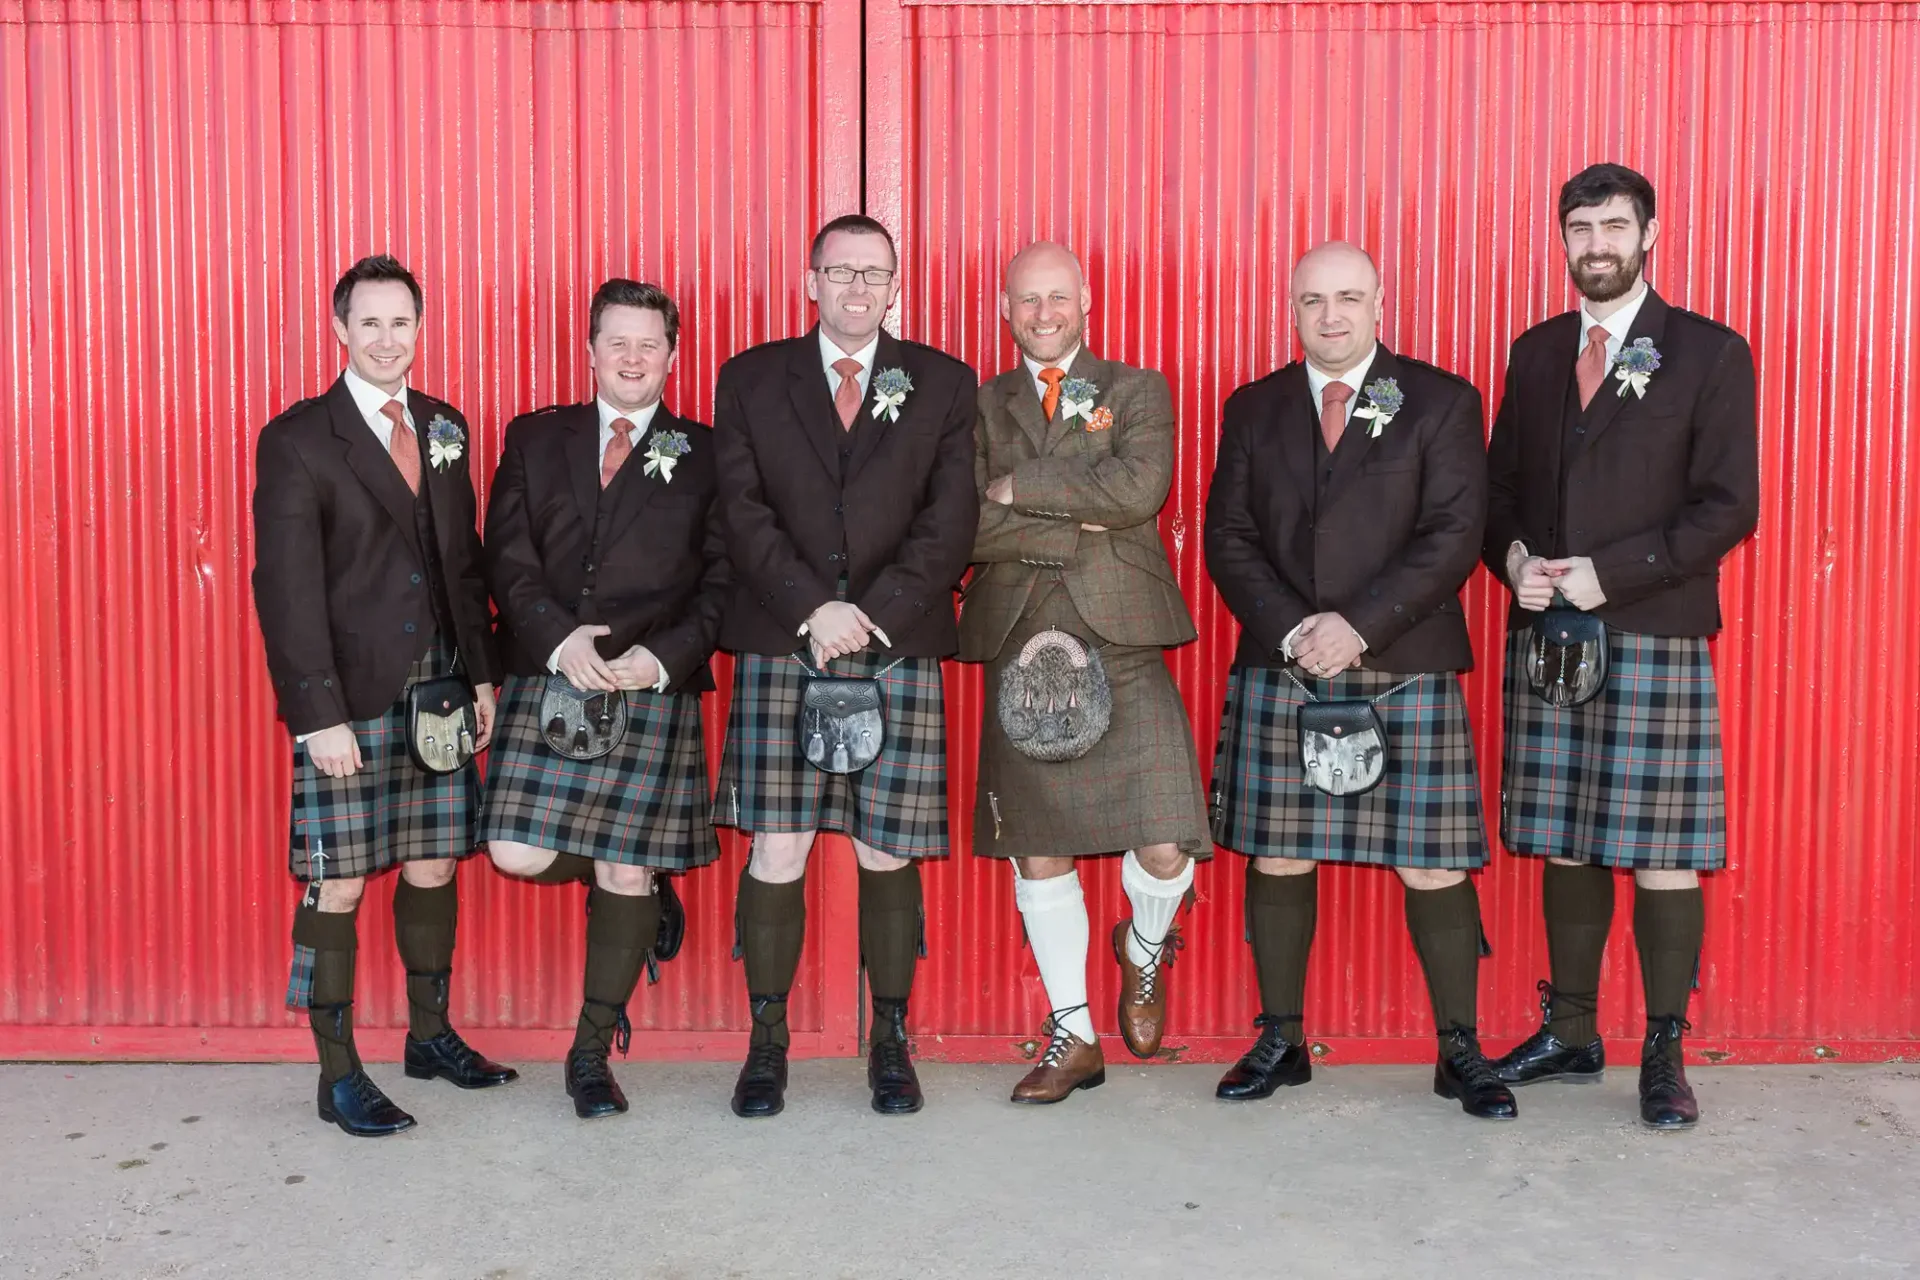 Six men in traditional scottish kilts and jackets standing in front of a red corrugated metal wall, smiling for the camera.